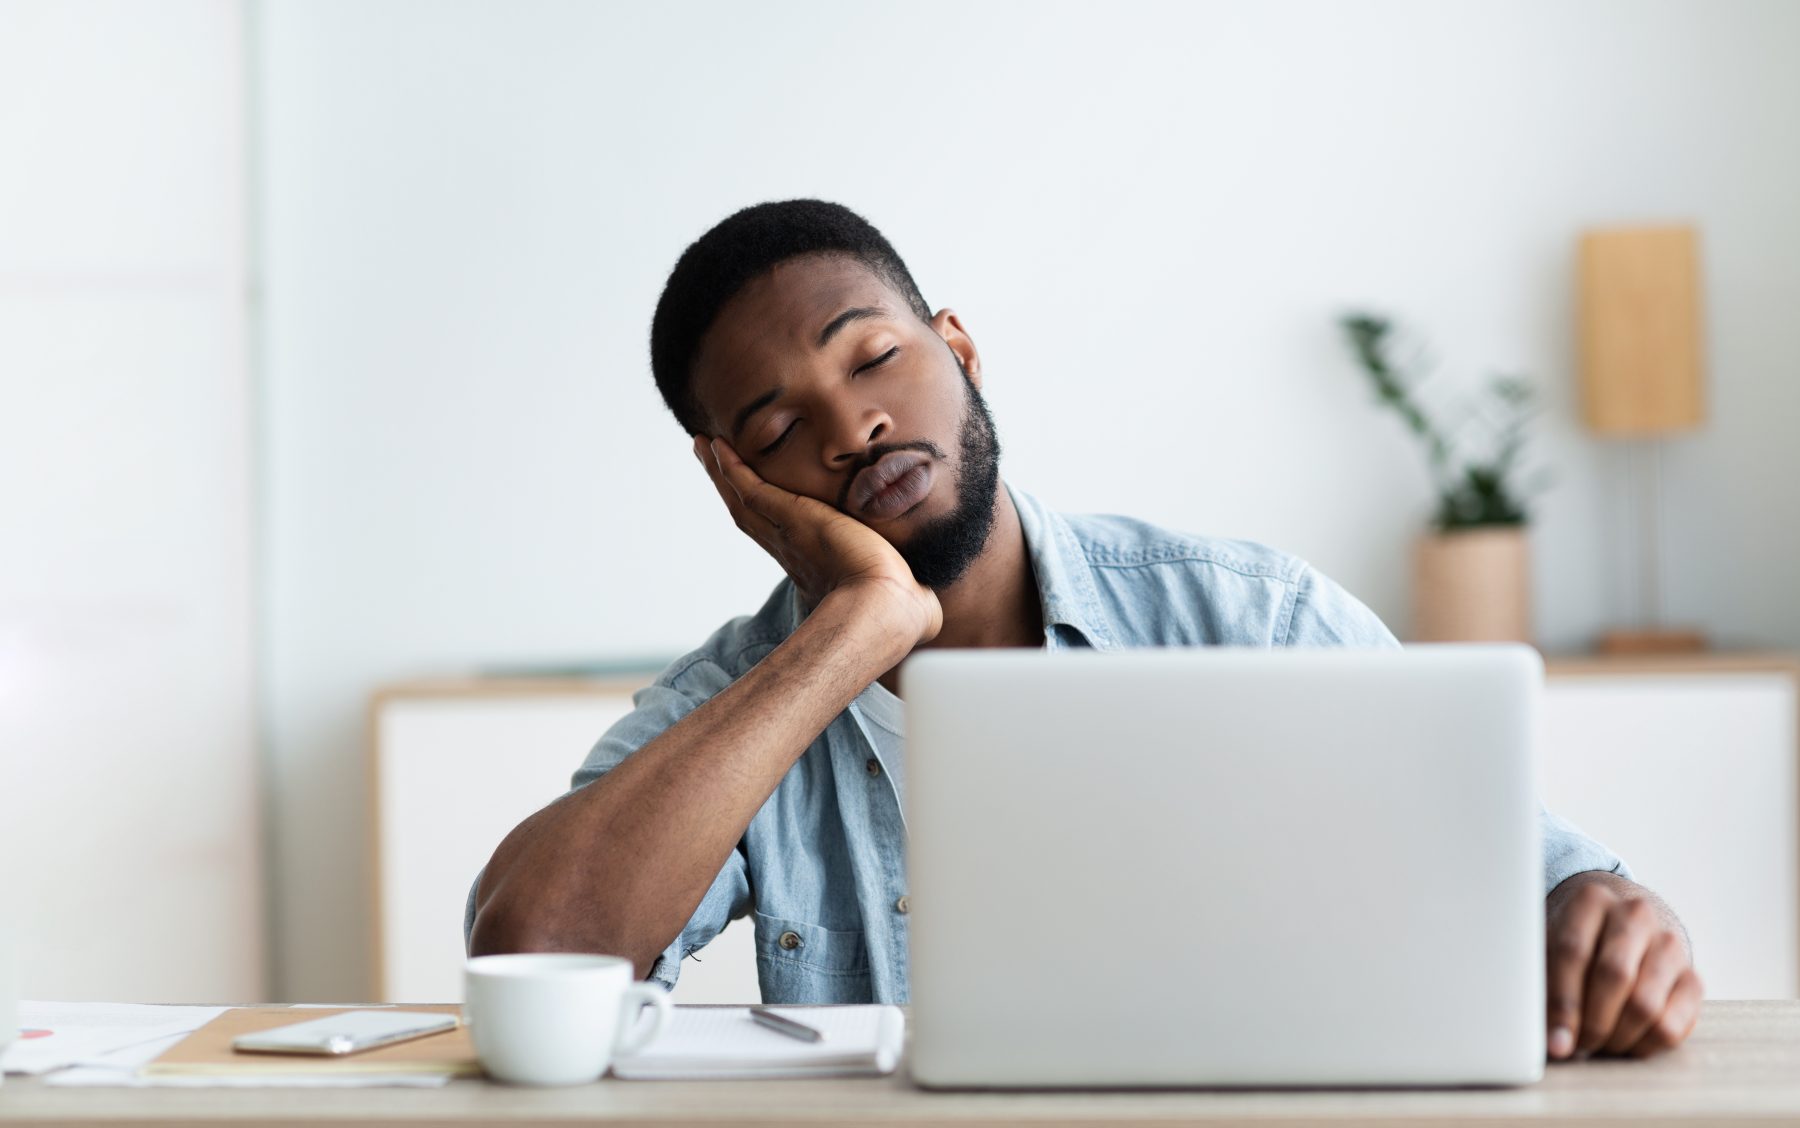 Exhausted worker with chronic fatigue